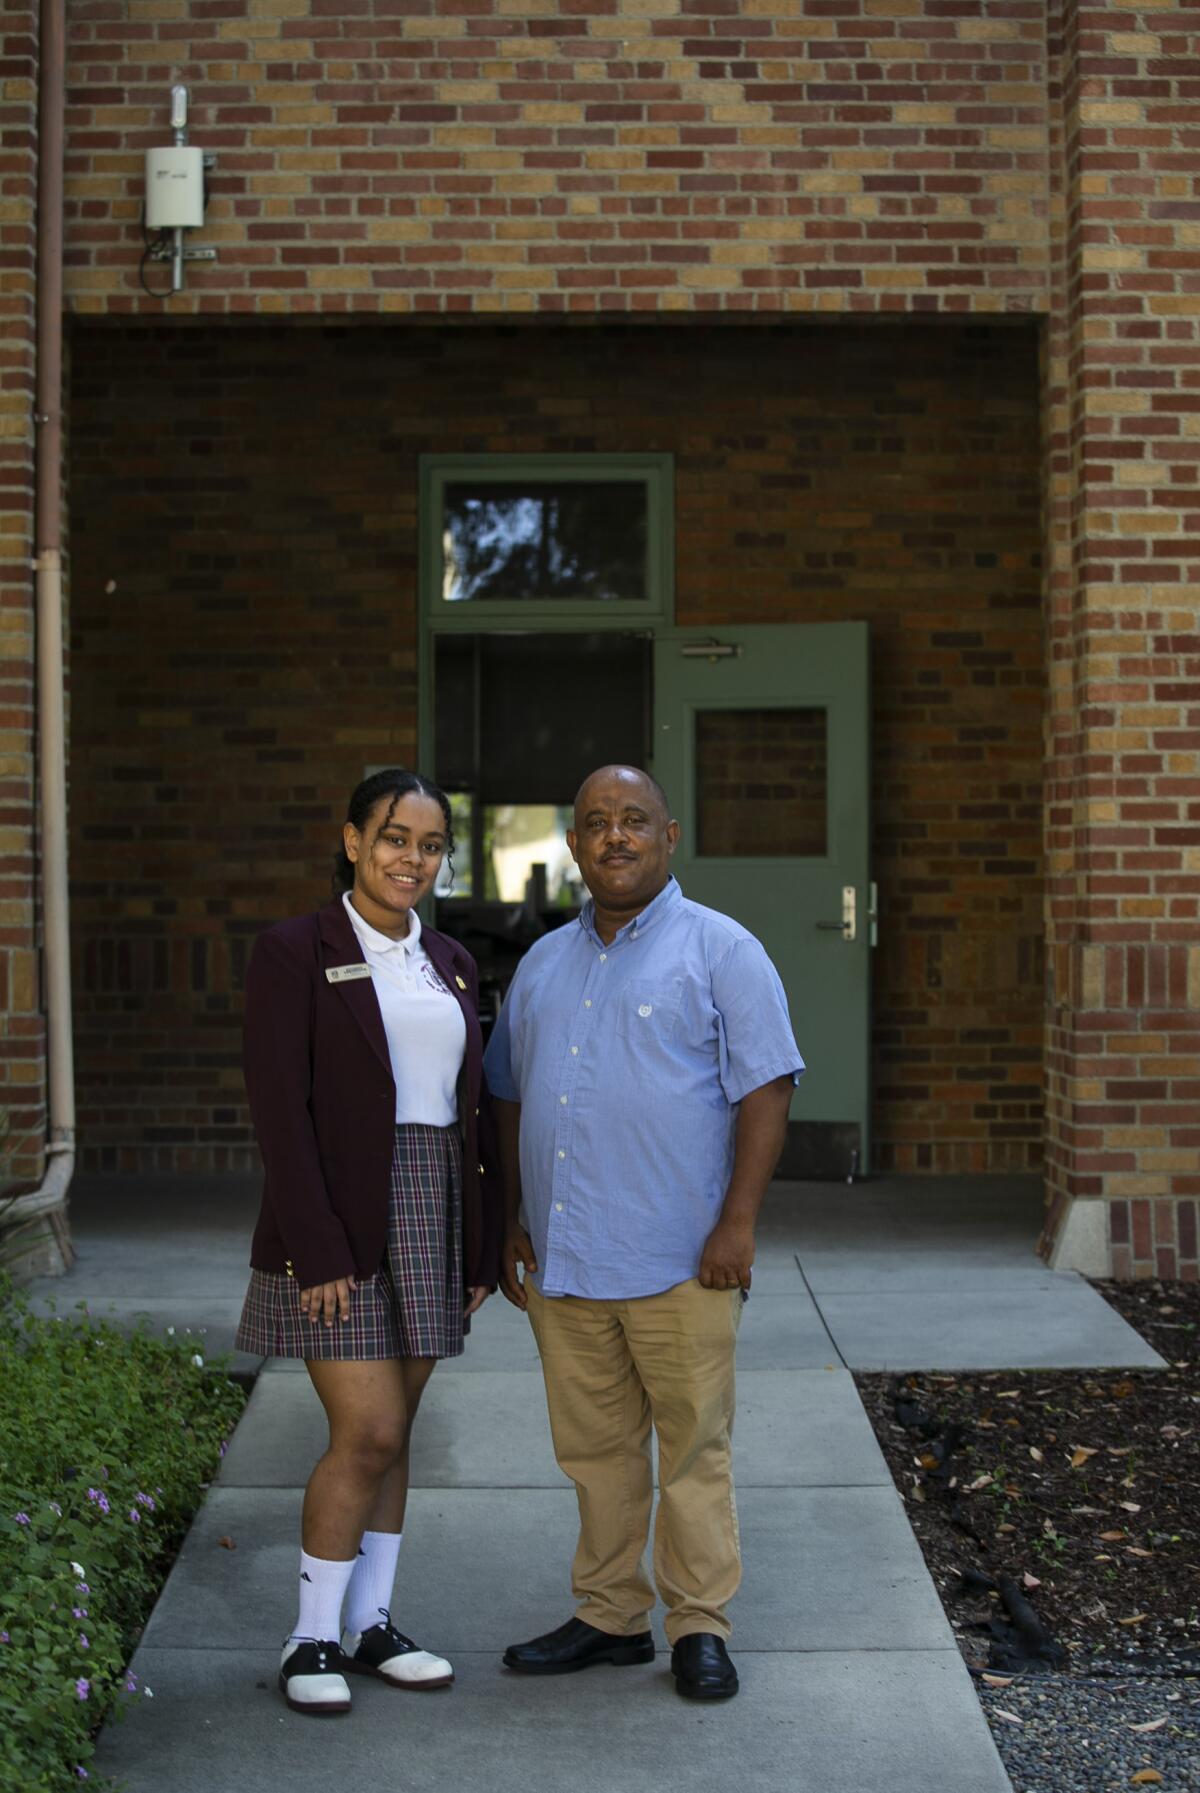 A father and daughter pose outside a high school